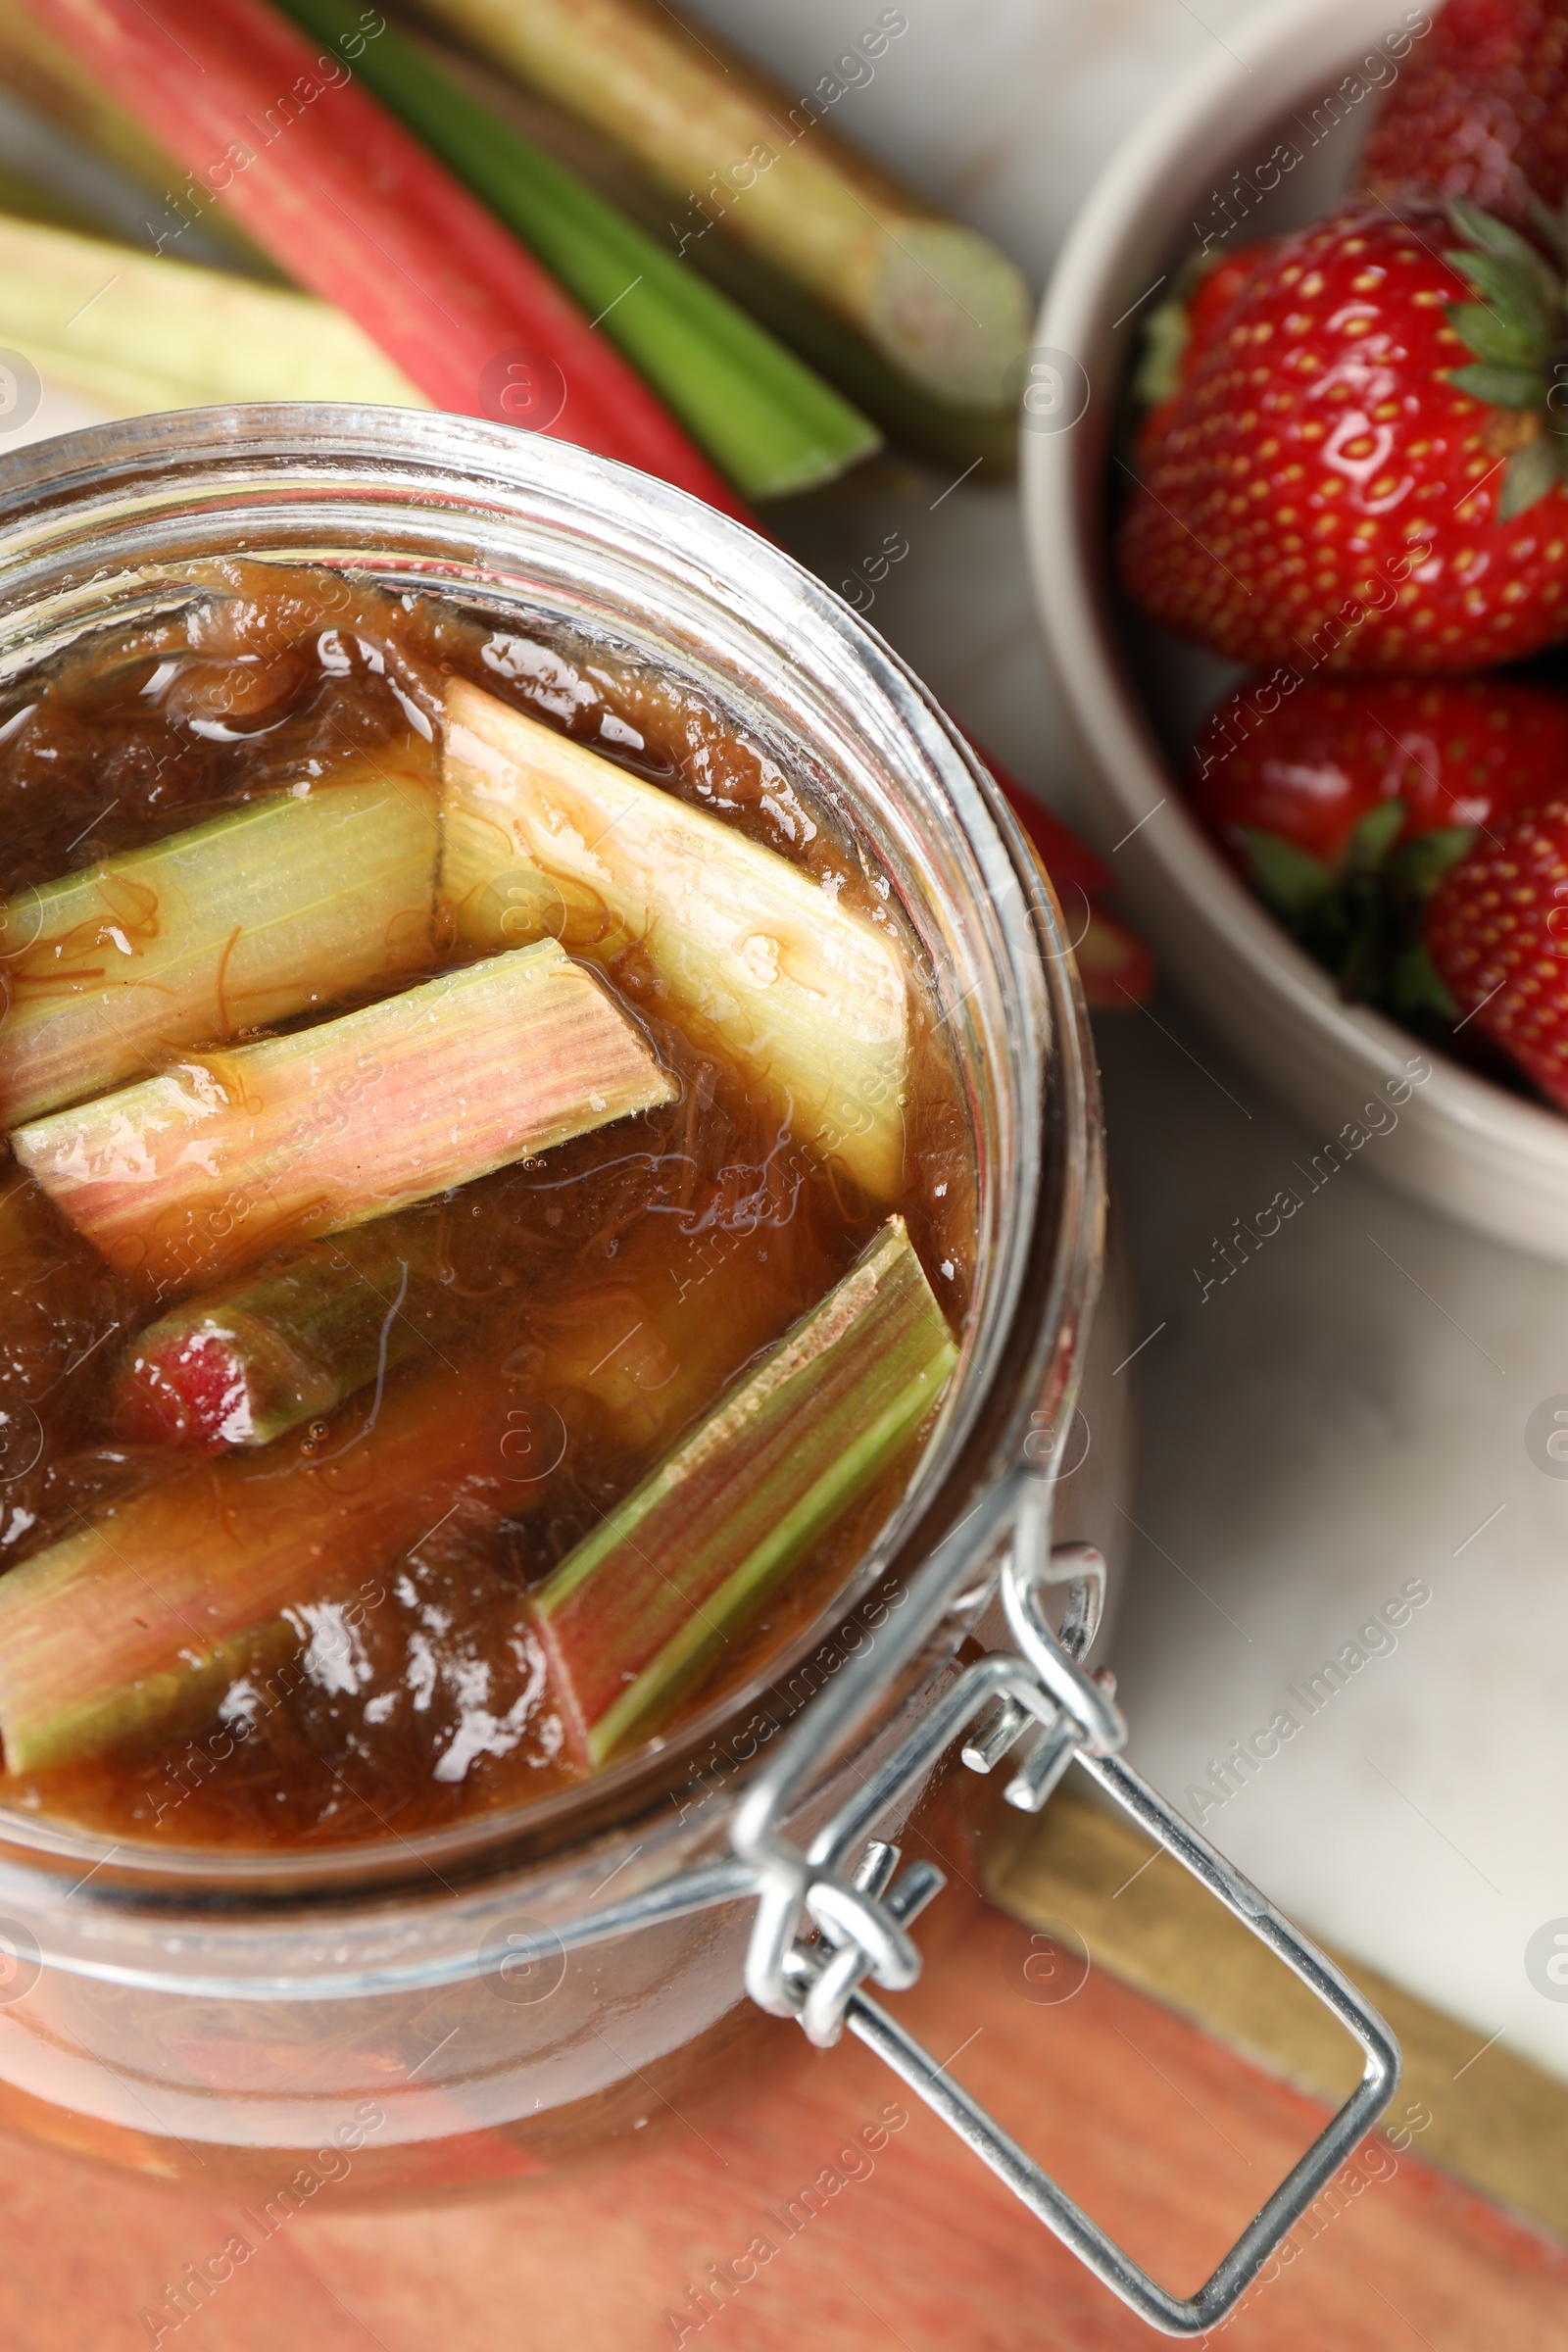 Photo of Jar of tasty rhubarb jam, fresh stems and strawberries on table, above view